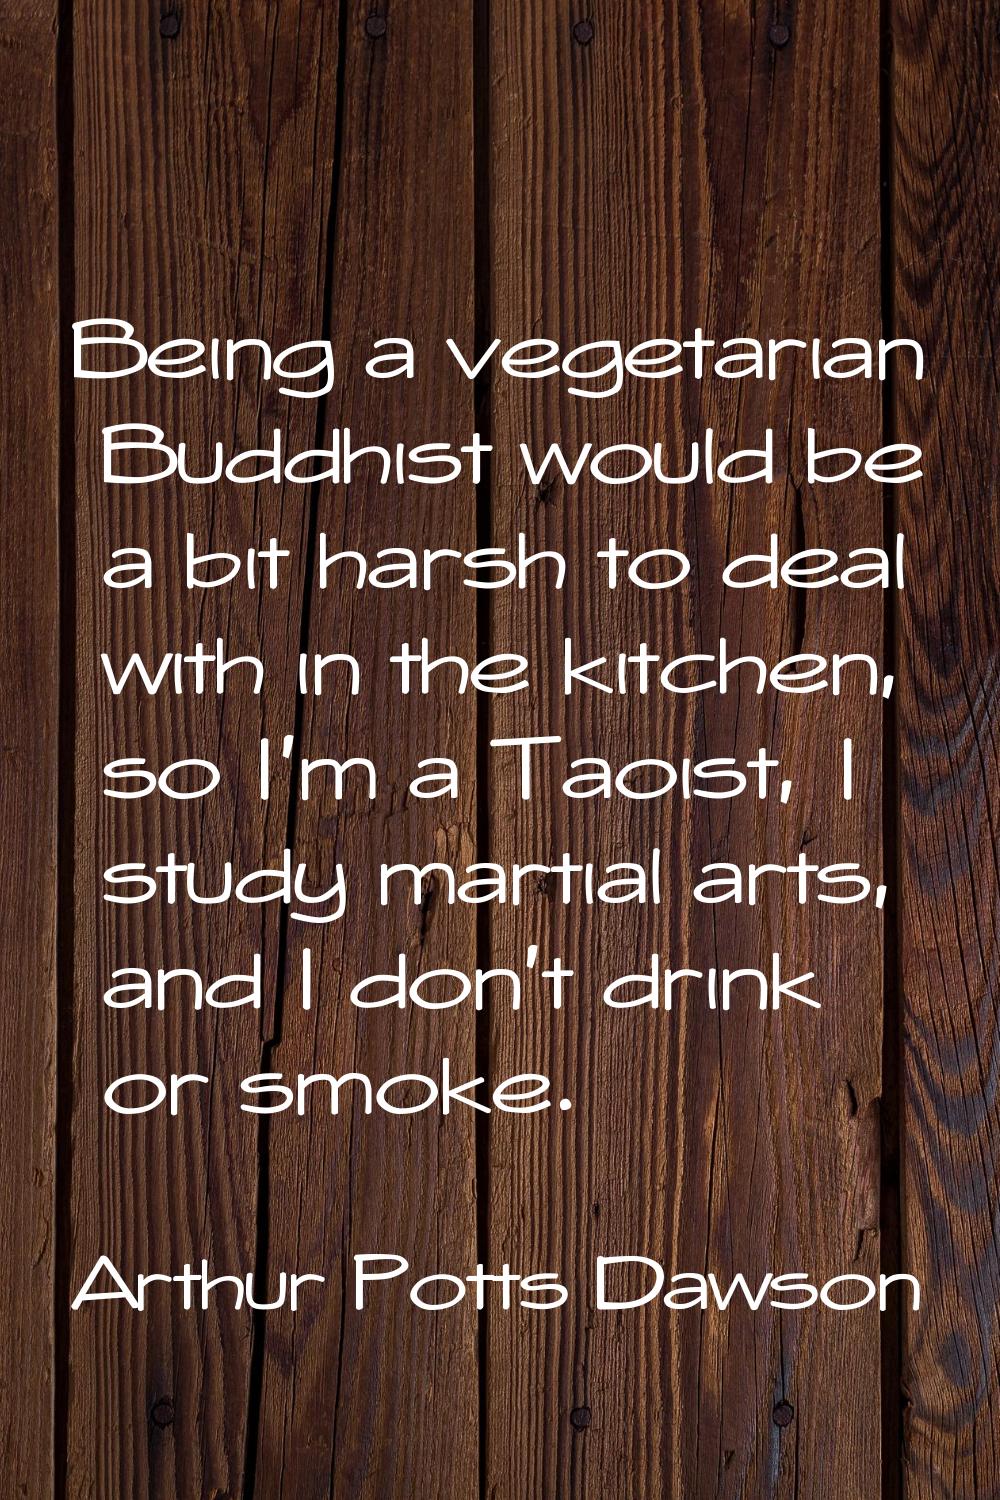 Being a vegetarian Buddhist would be a bit harsh to deal with in the kitchen, so I'm a Taoist, I st